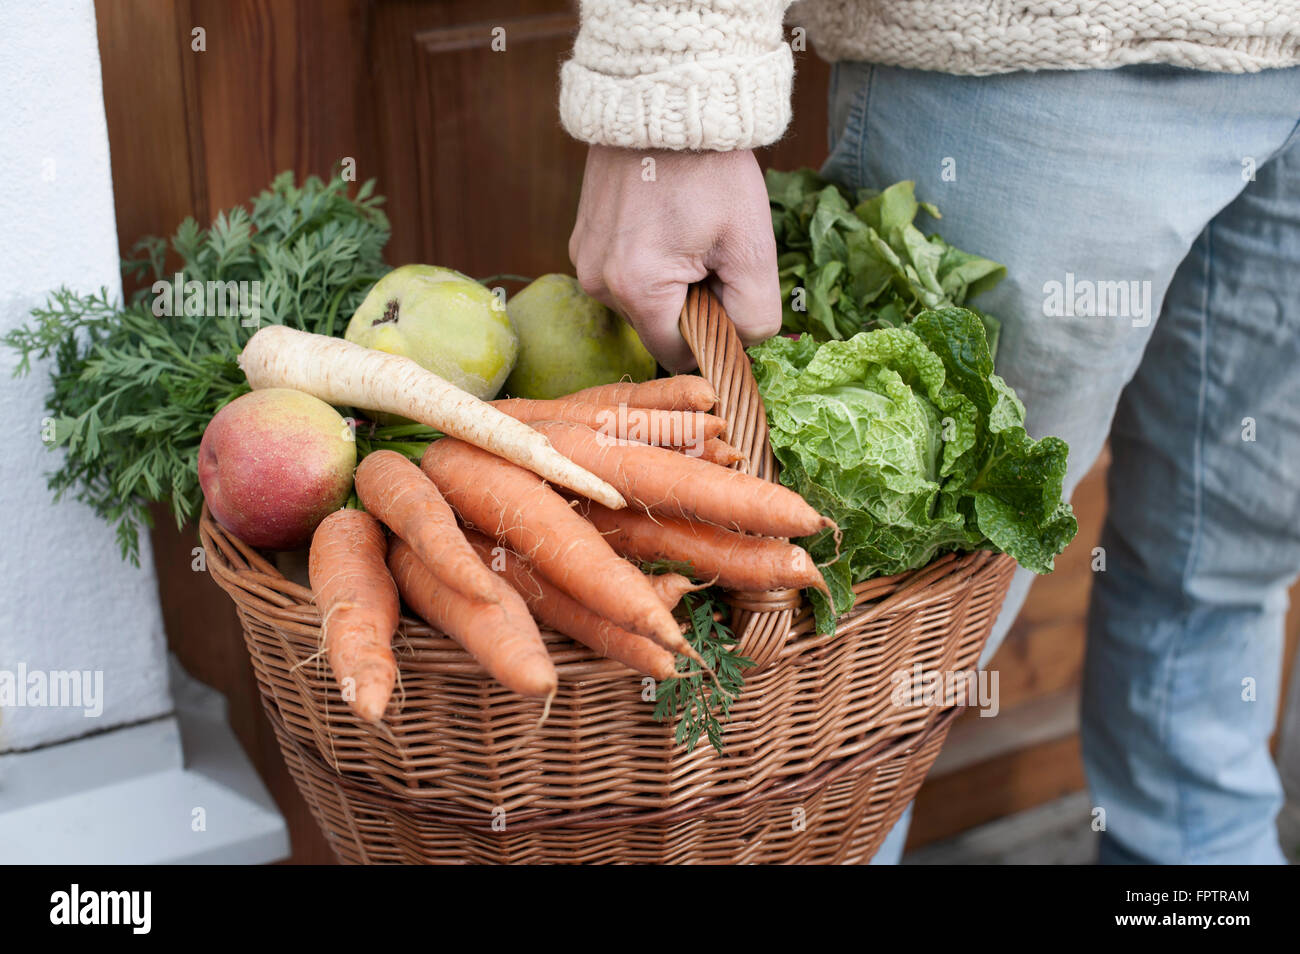 Mid section of a man holding basket full of vegetables in his hand standing in front of wholefood shop, Bavaria, Germany Stock Photo